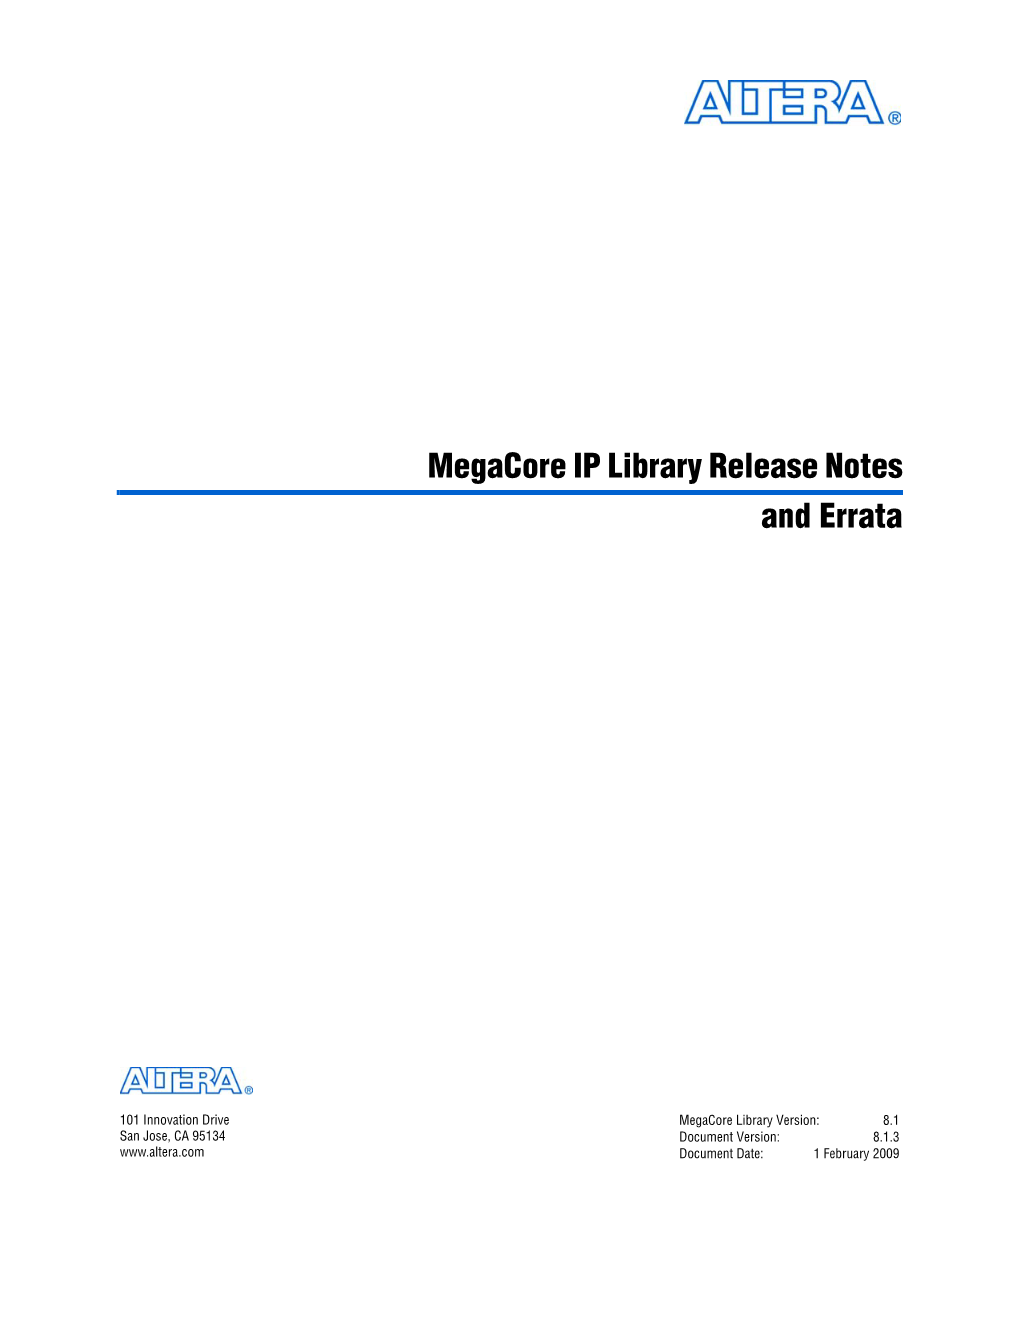 Megacore IP Library Release Notes and Errata